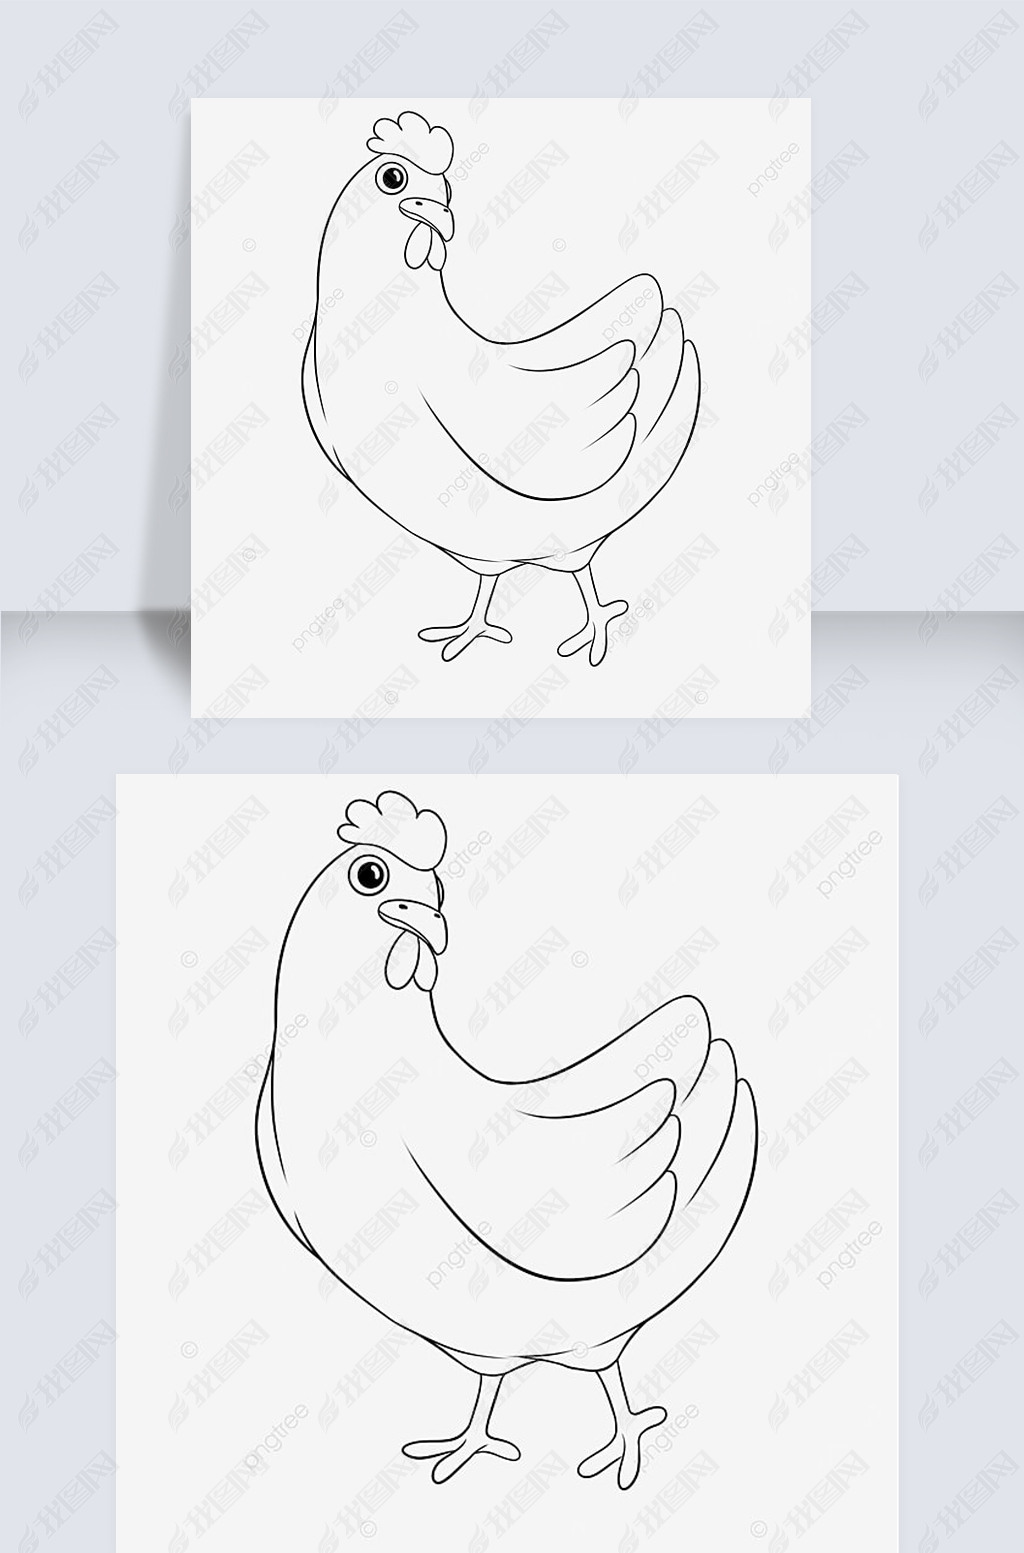 chicken clipart black and white ڰֻС